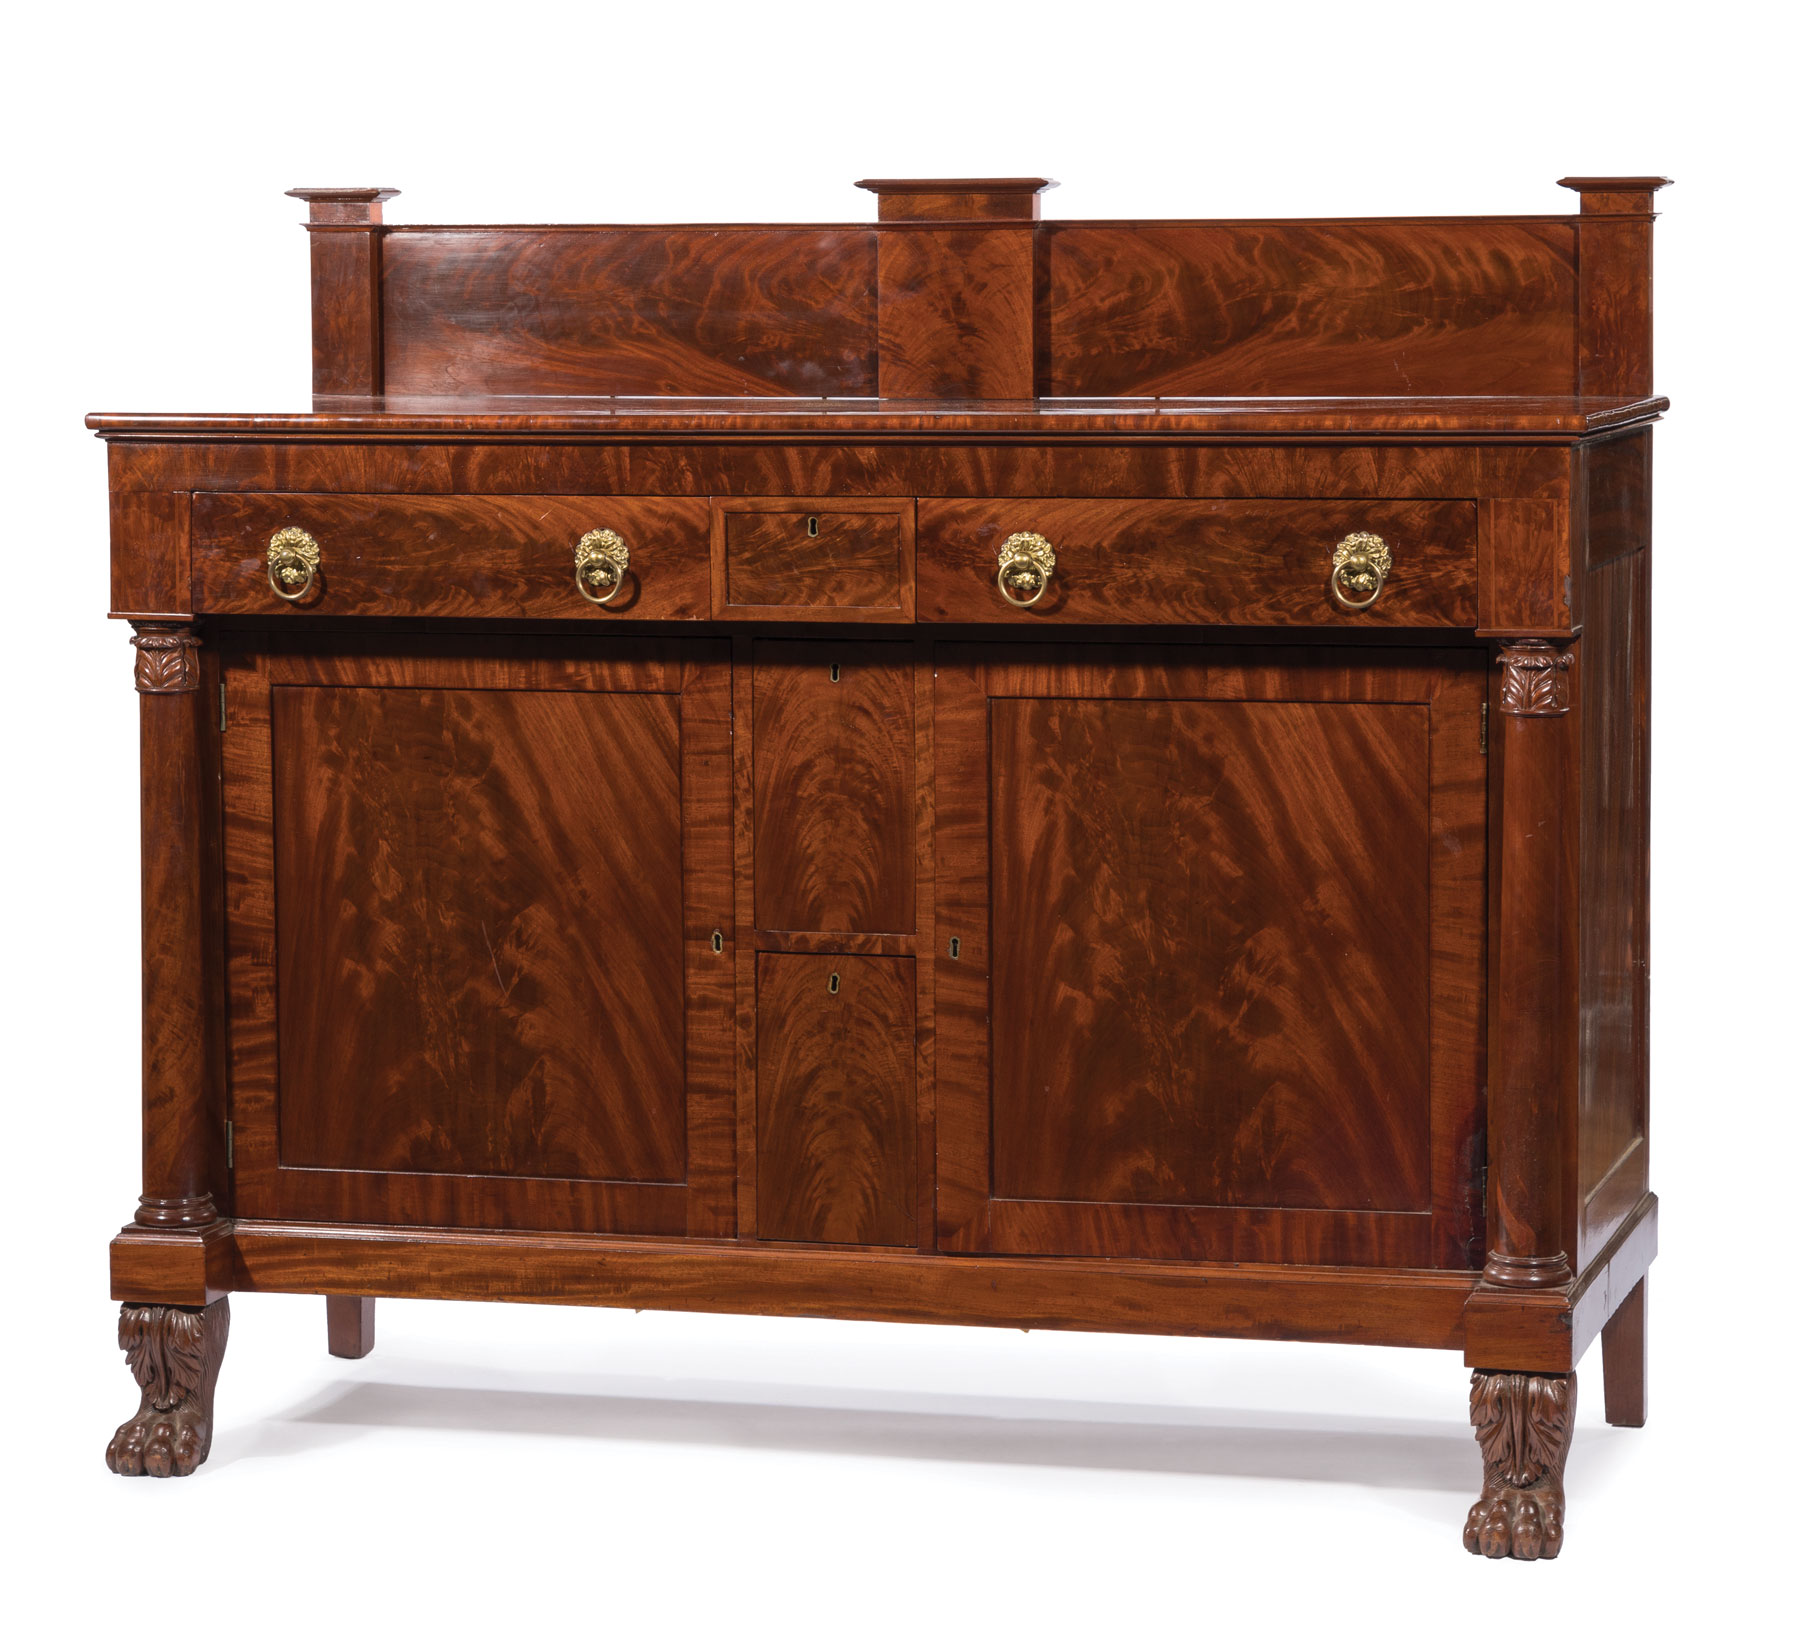 American Classical Carved Mahogany Sideboard , early 19th c., New York, blocked backsplash, outset